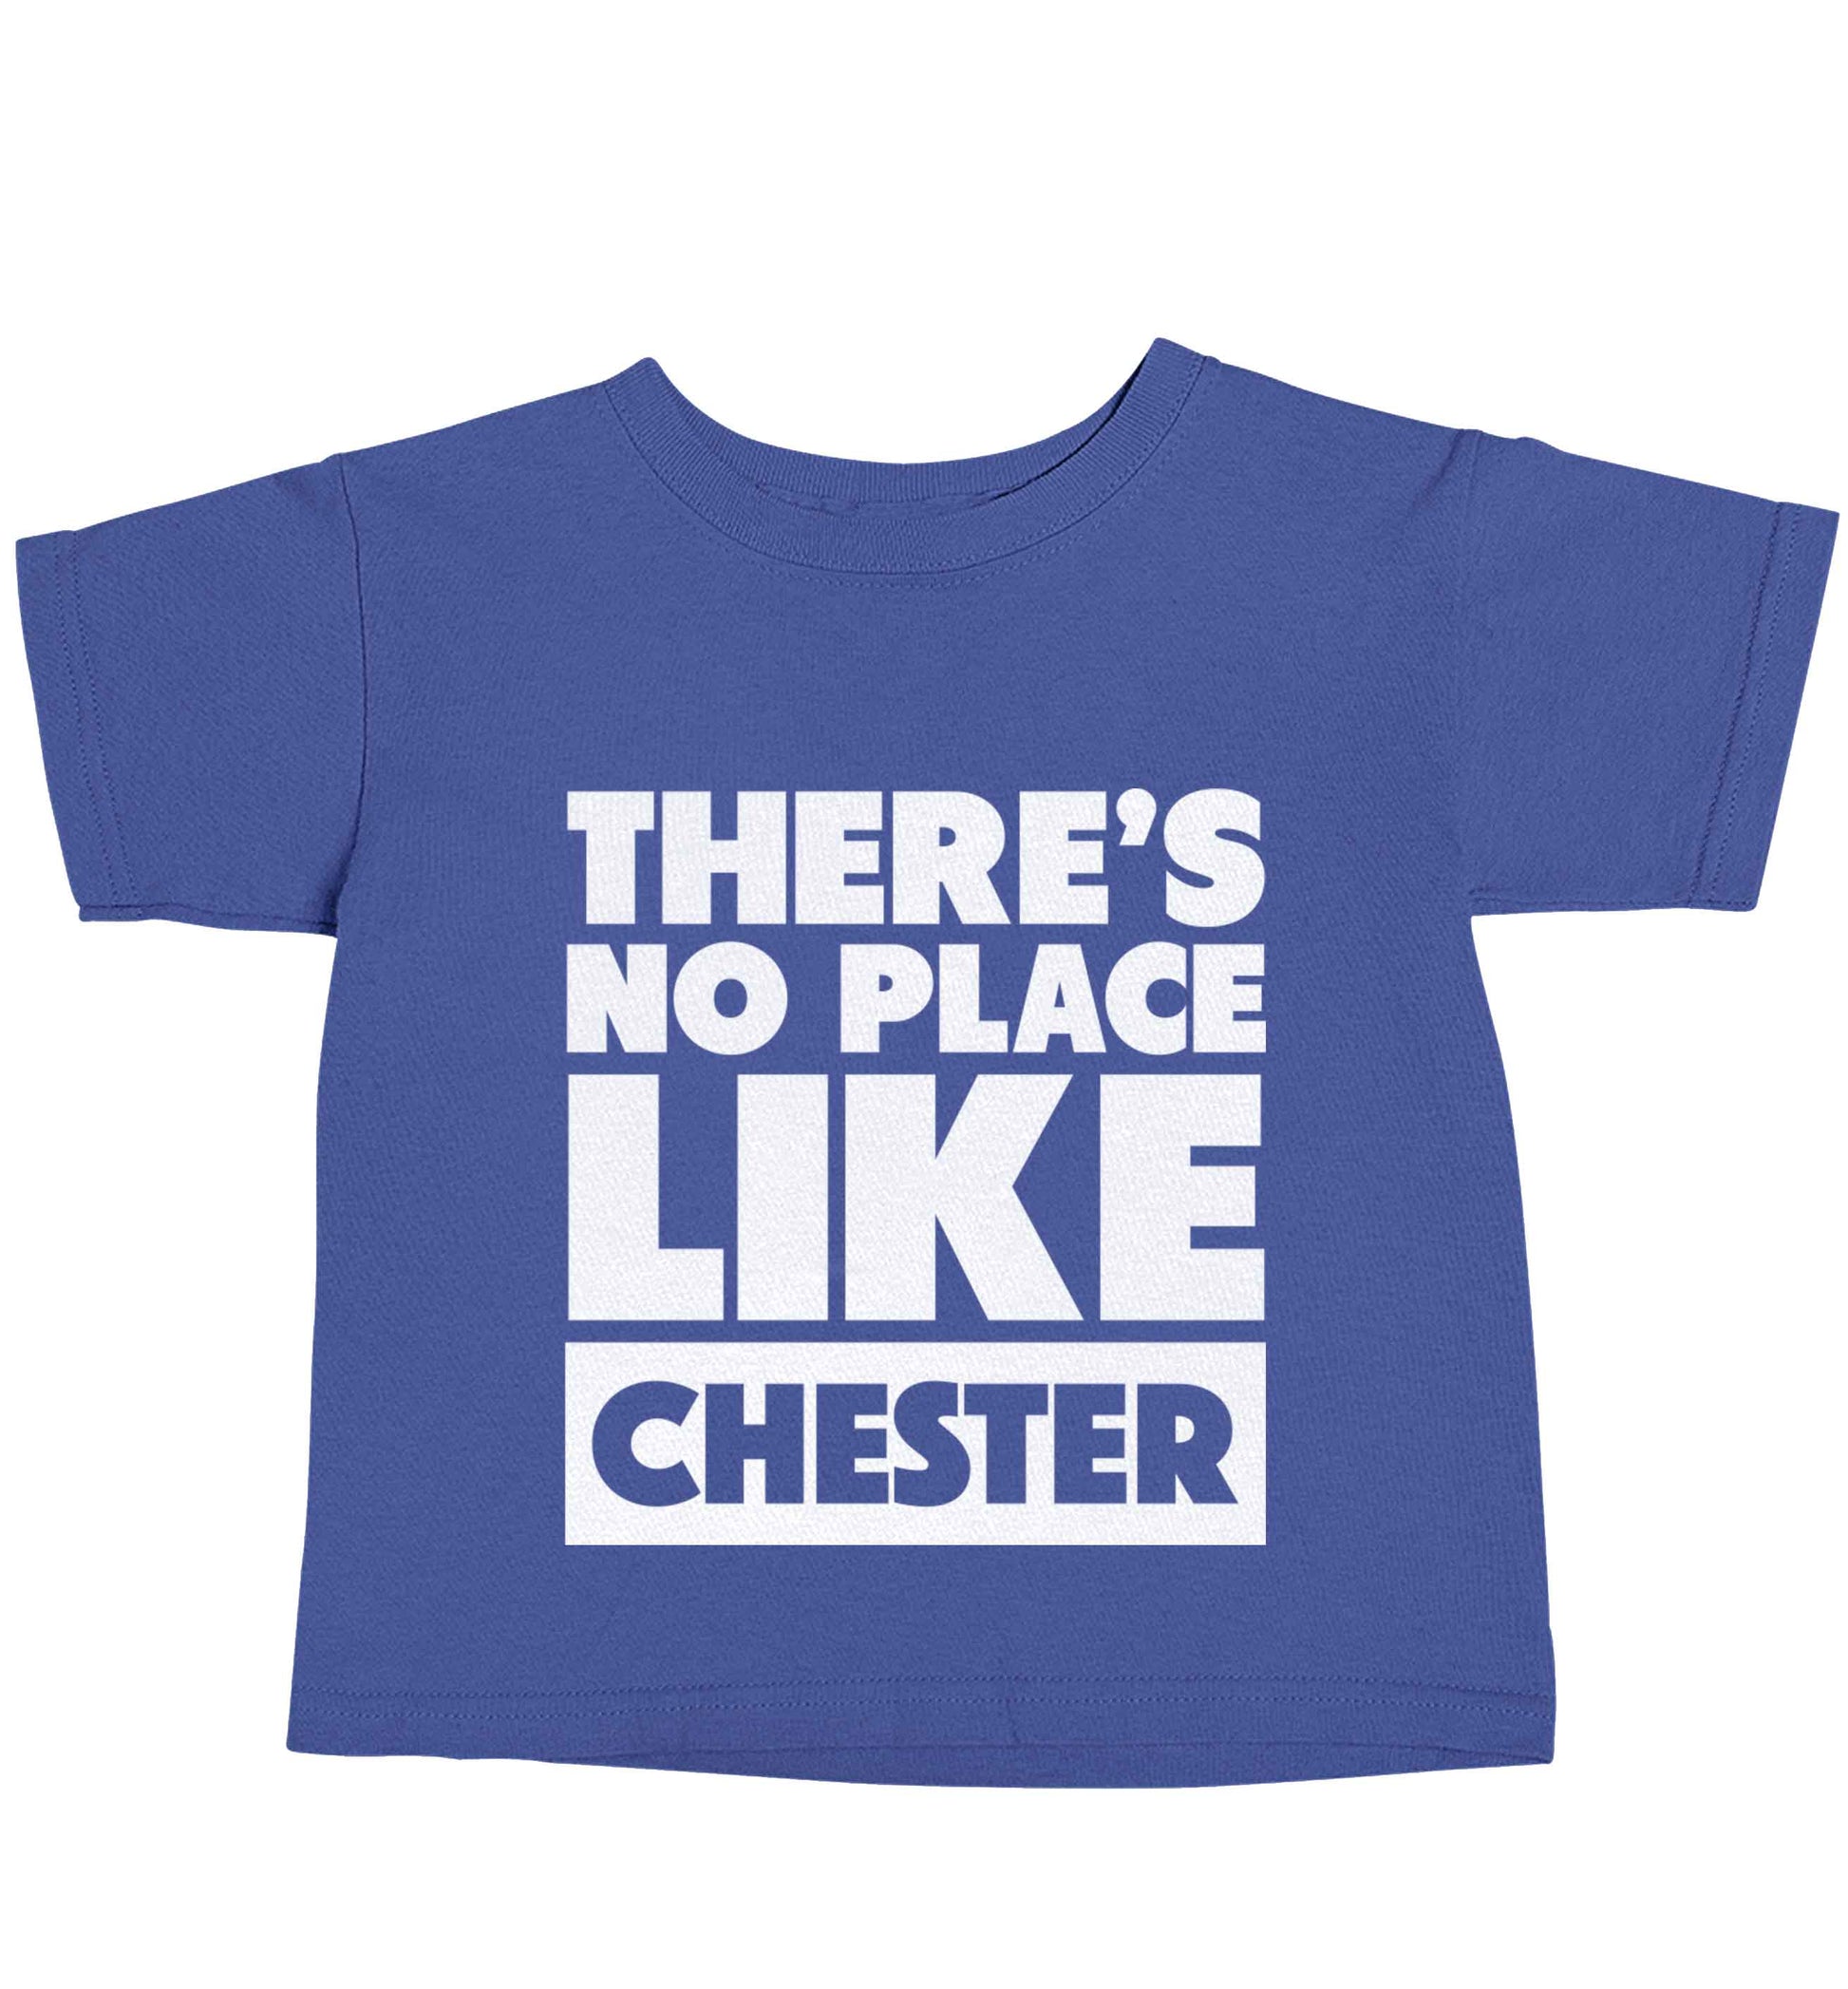 There's no place like Chester blue baby toddler Tshirt 2 Years